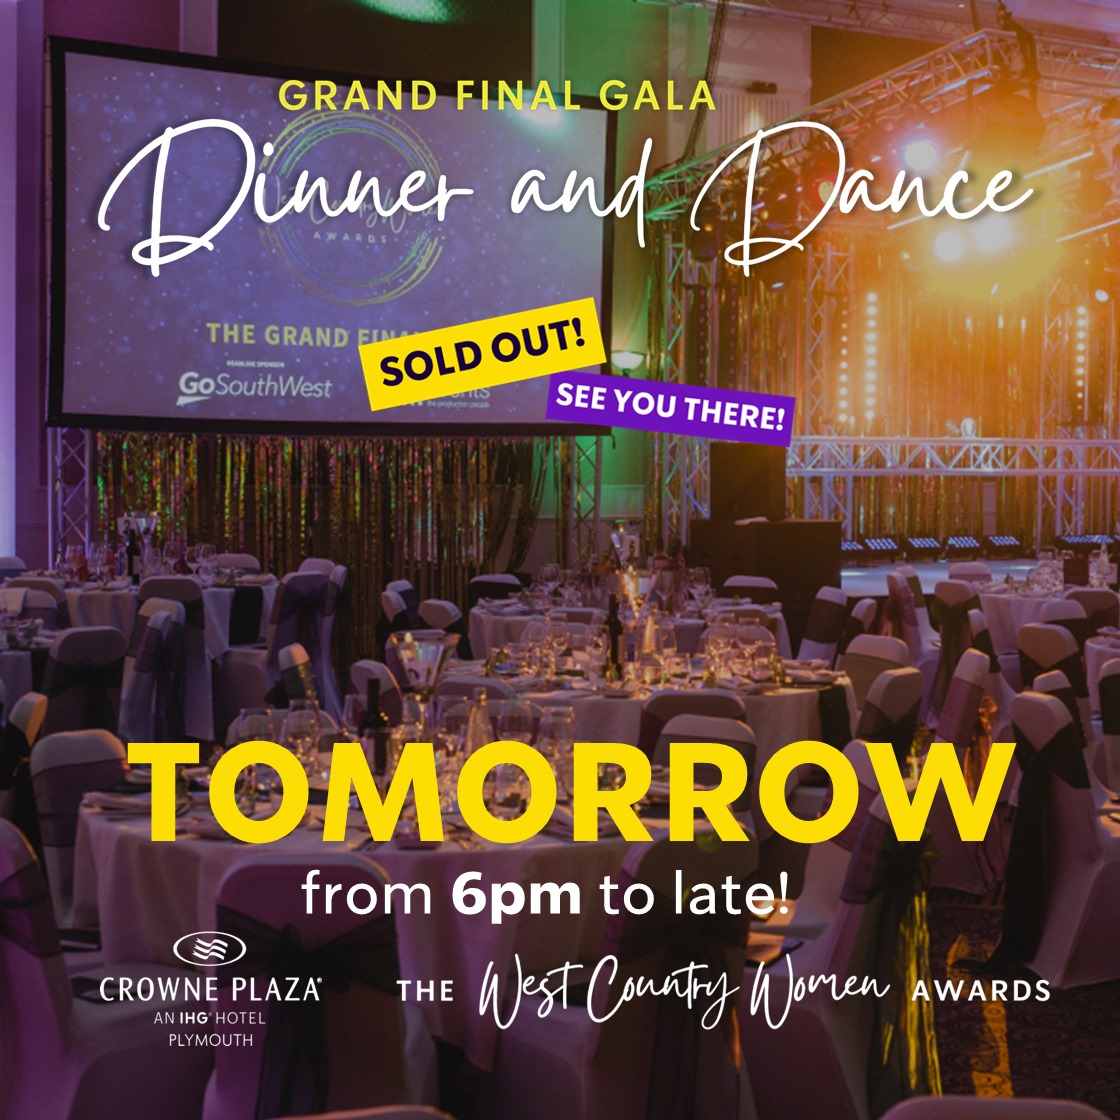 The Grand Final Gala Dinner & Dance is TOMORROW!! 🎉 We are so excited to be holding this event for the West Country Women Finalists - Good luck to you all, you're all amazing and all Winners for getting this far... 👏 Thank you to our amazing sponsors and supporters, without